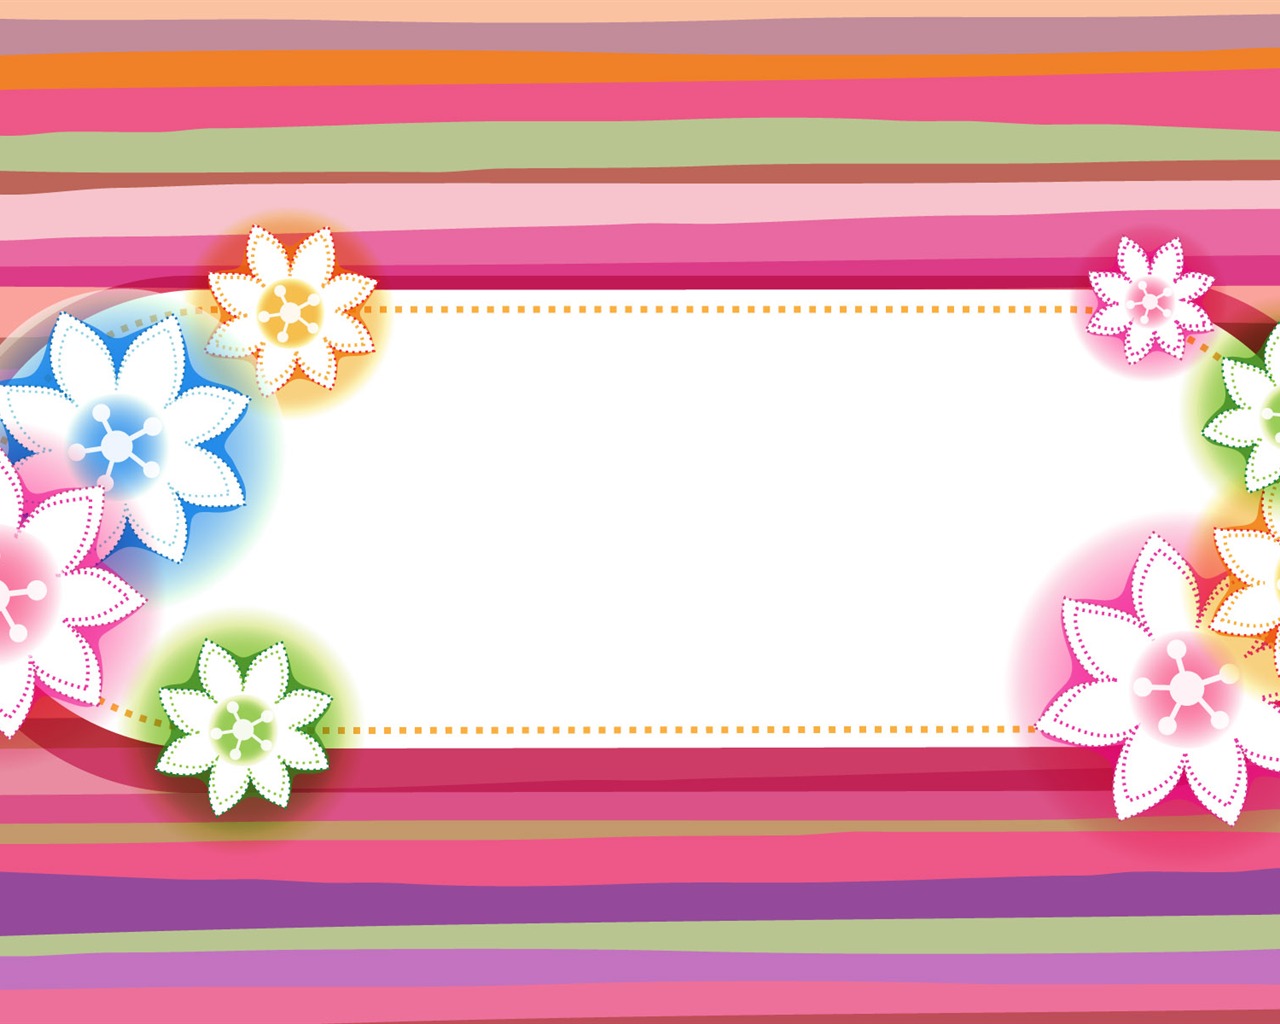 Colorful vector background wallpaper (3) #5 - 1280x1024